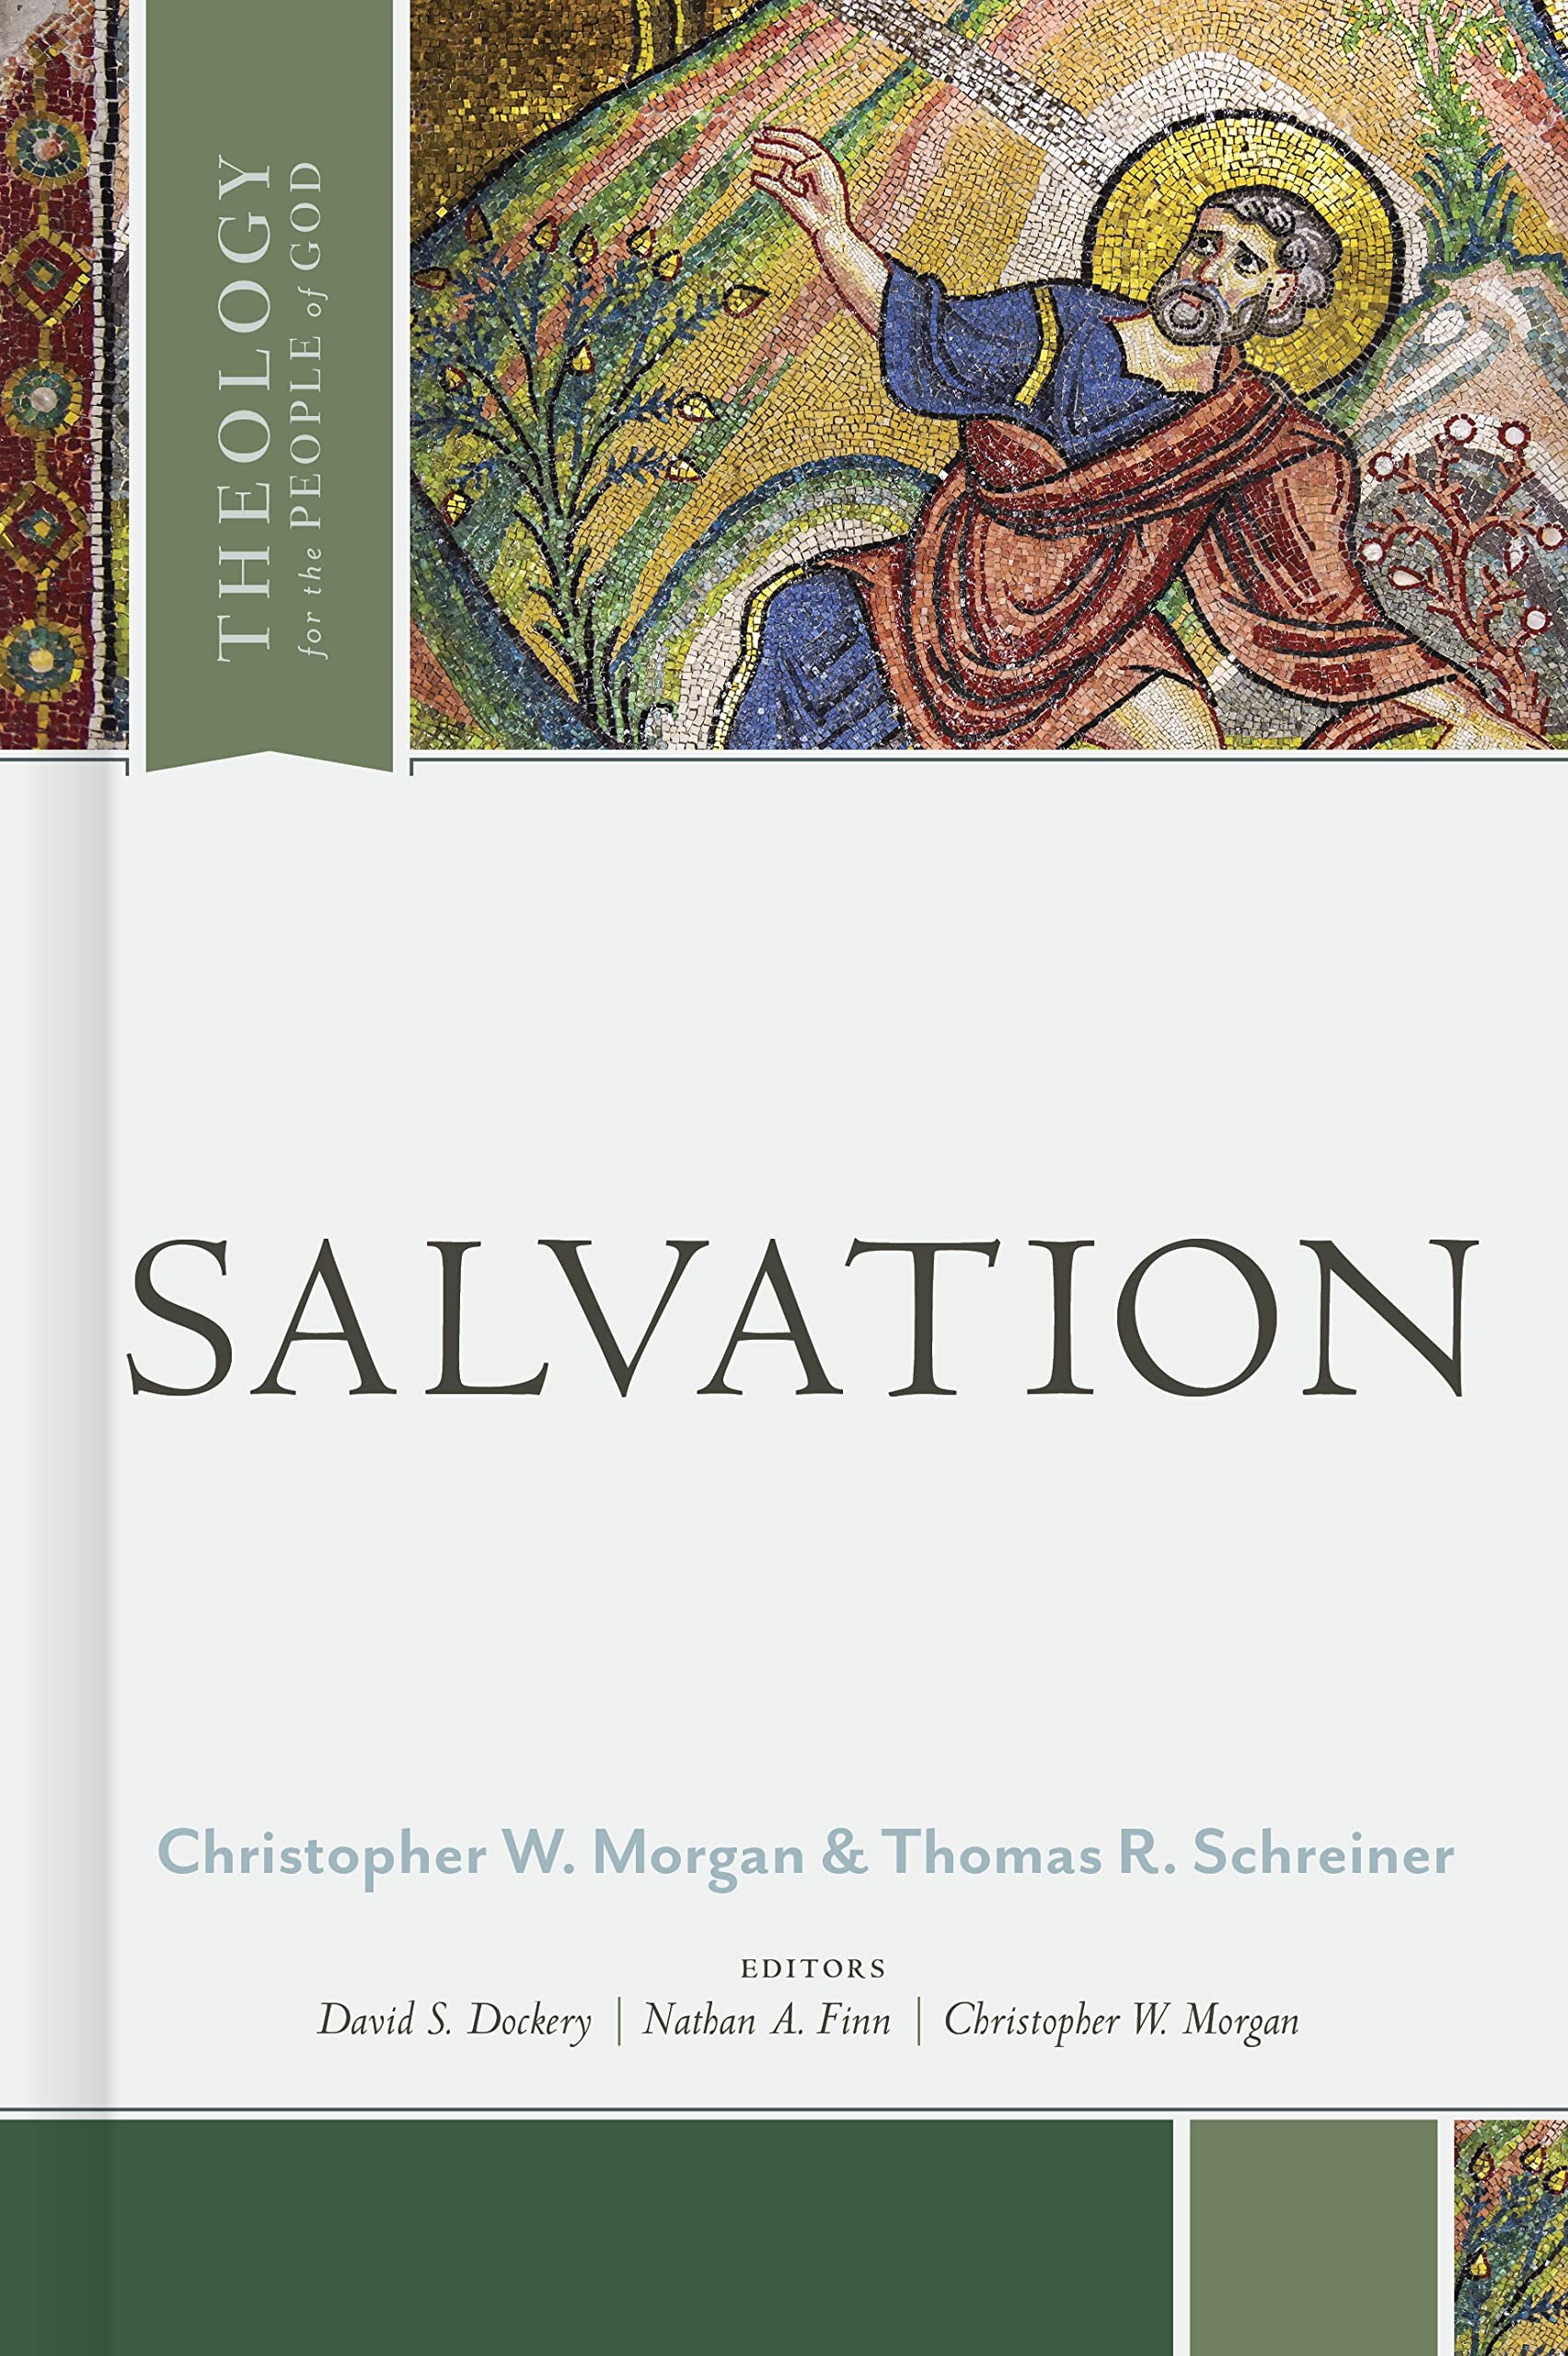 Salvation (Theology for the People of God)